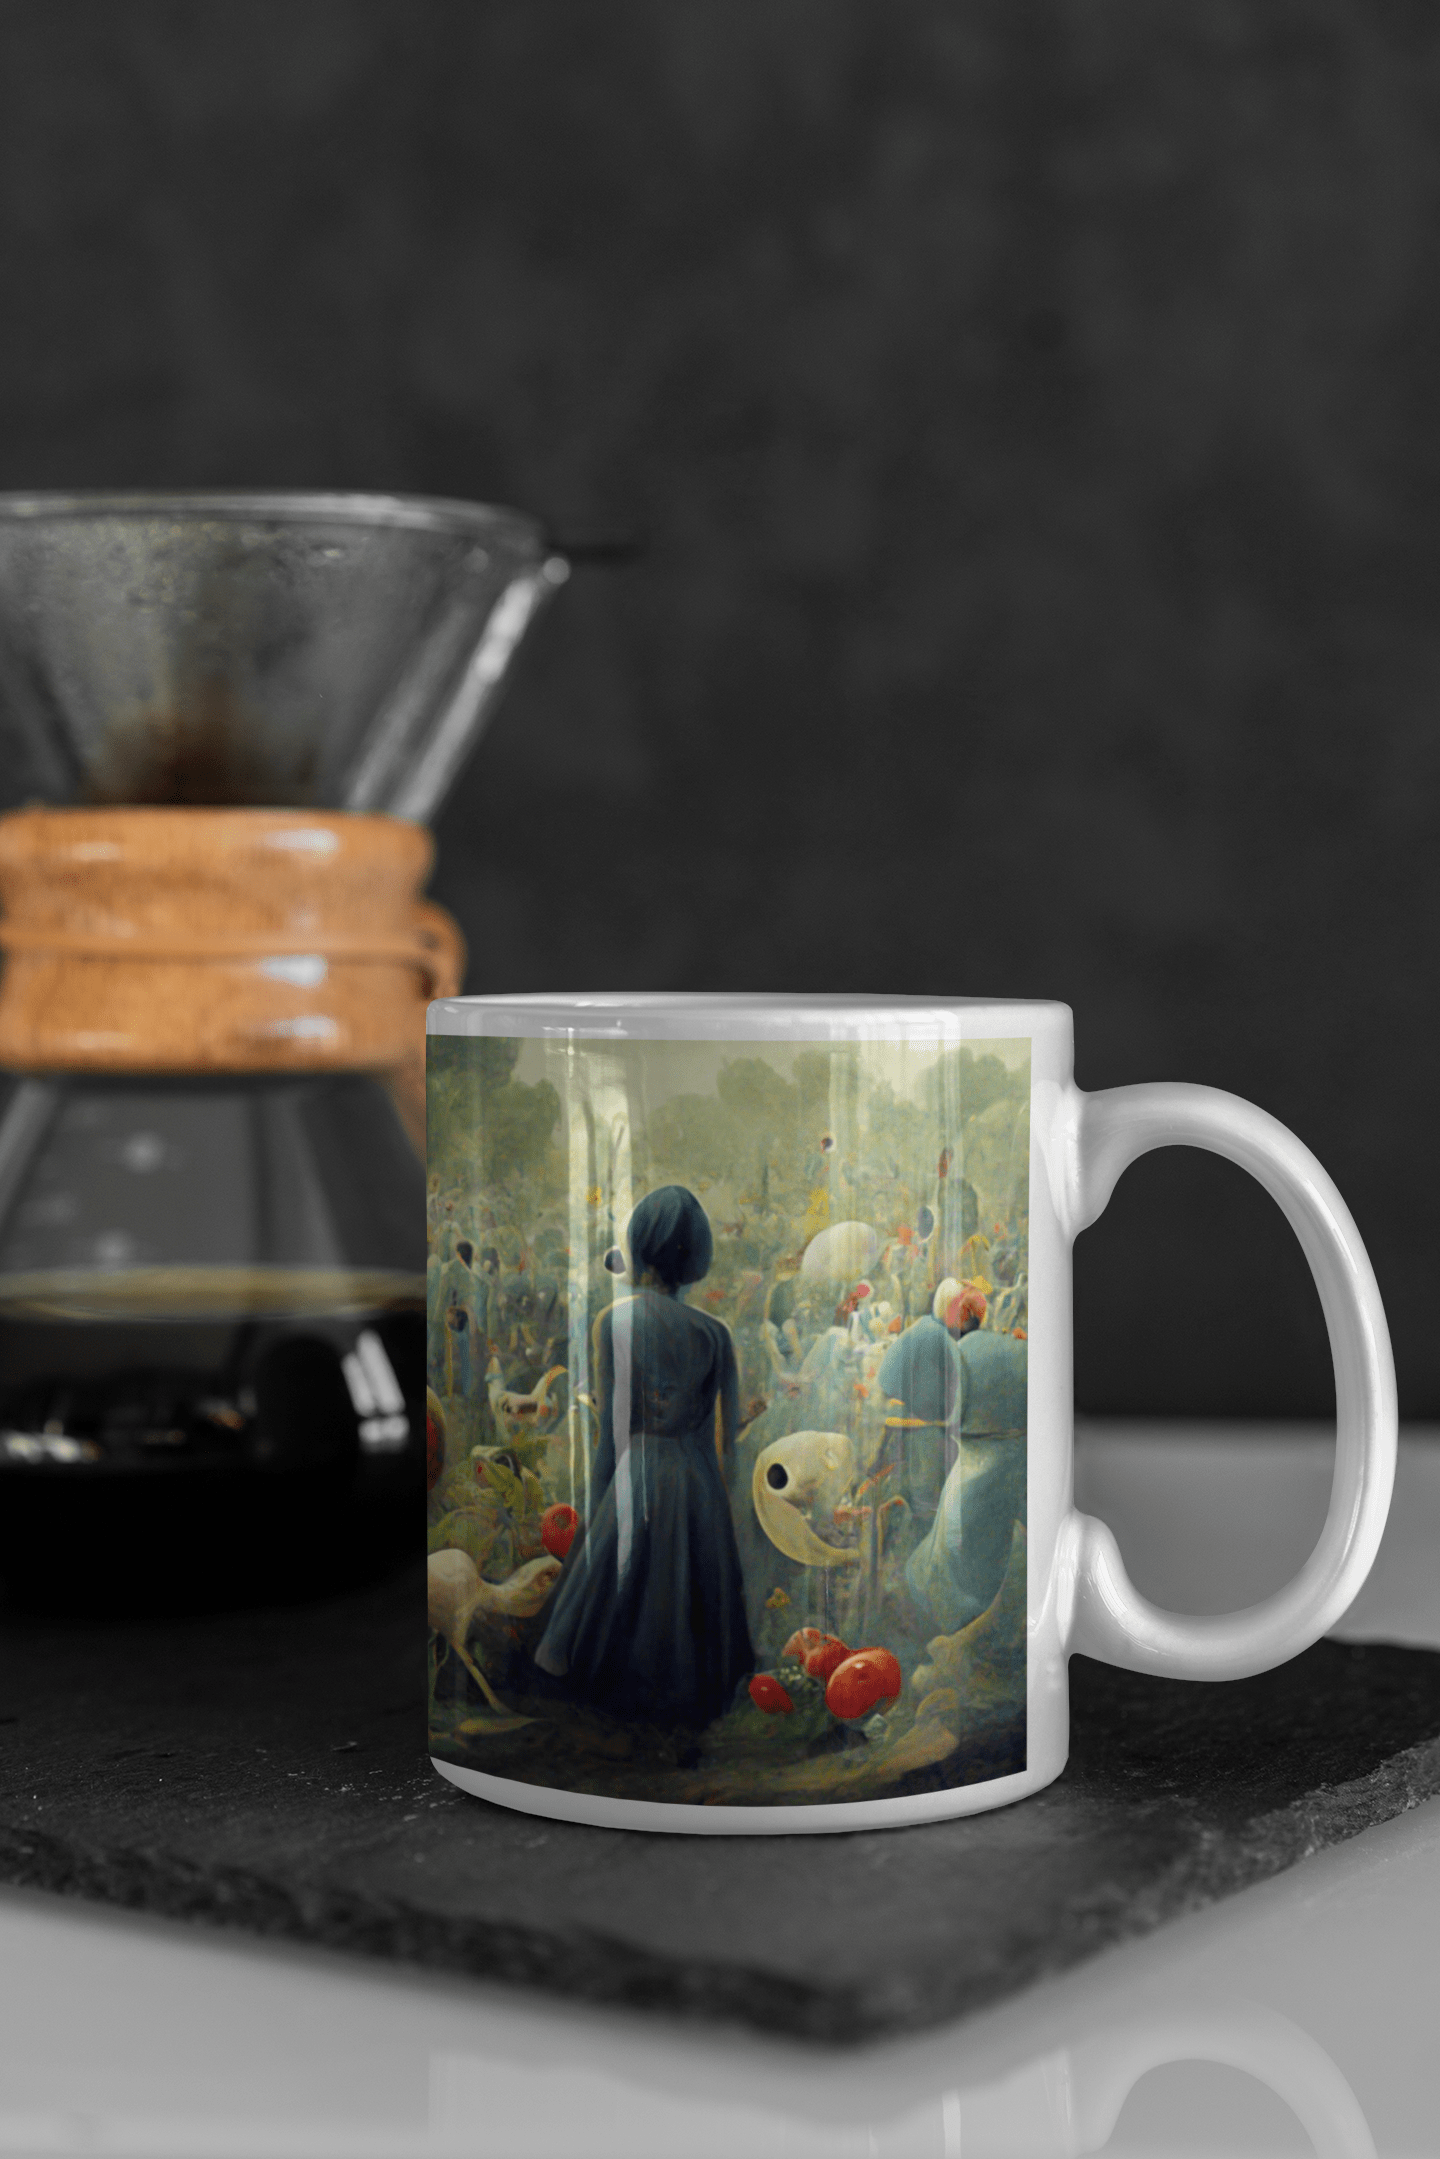 Mug in the style of The Garden of Earthly Delights